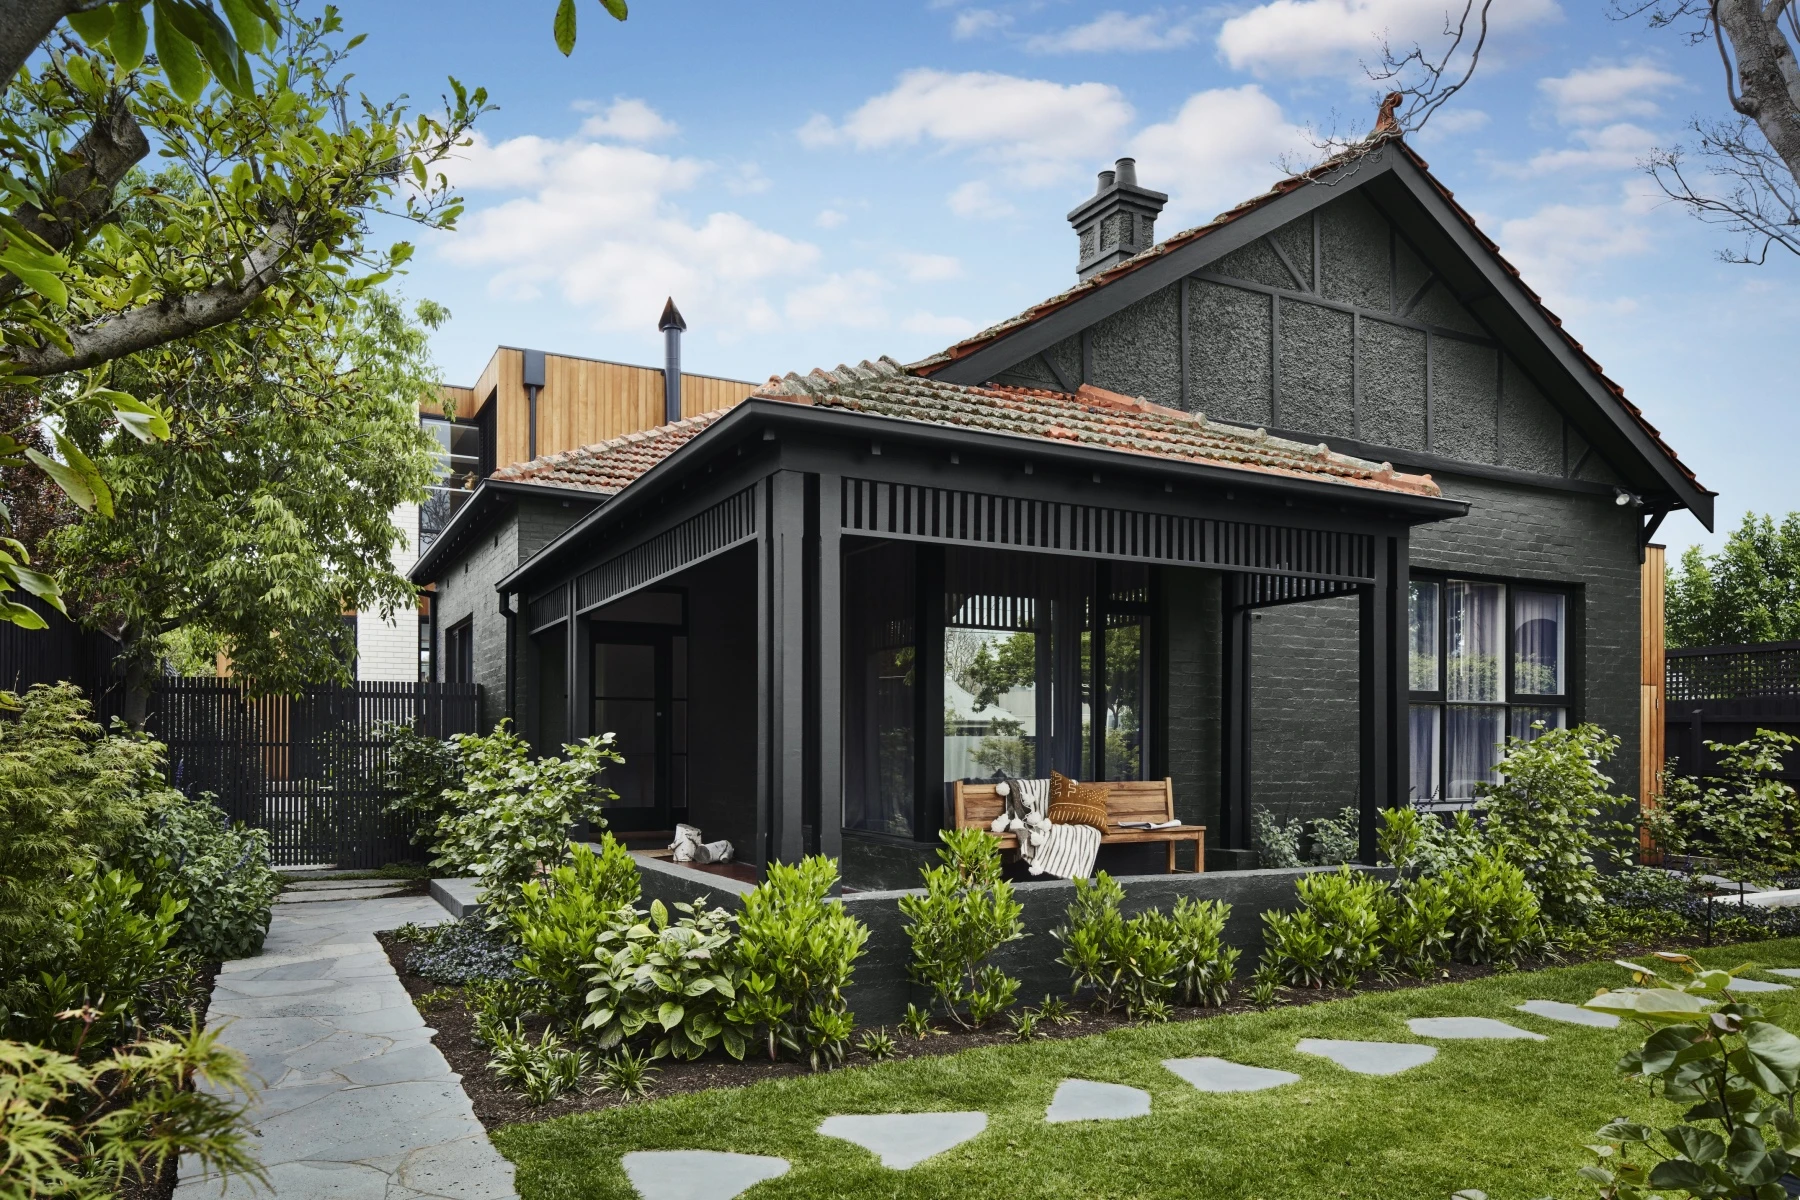 Popular exterior outside schemes, black house and roof with orange red tiled roof, manicured garden with stone pathway.
Colours: Domino (trim) and Teahouse (exterior)